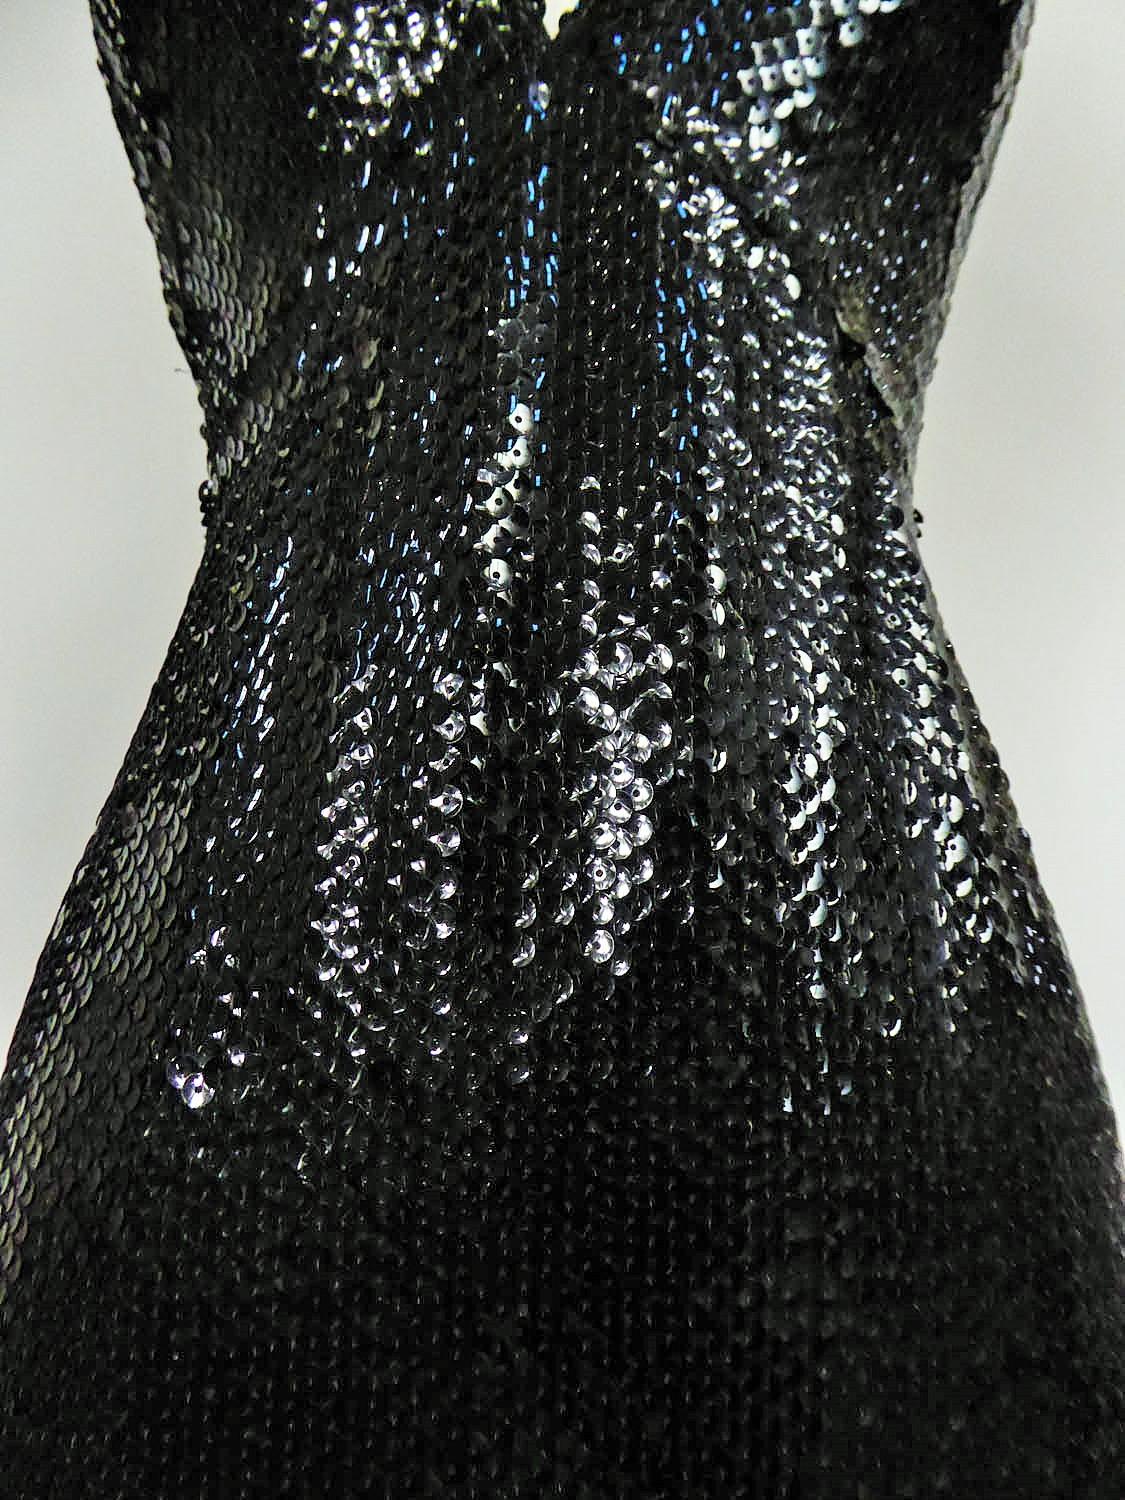 Circa 1970/1980
France Paris

Loris Azzaro Haute Couture evening dress embroidered with black sequins dating from the 70's. Entirely embroidered with black sequins superimposed like fish scales. Skin-tight dress and halterneck with large V-neck in